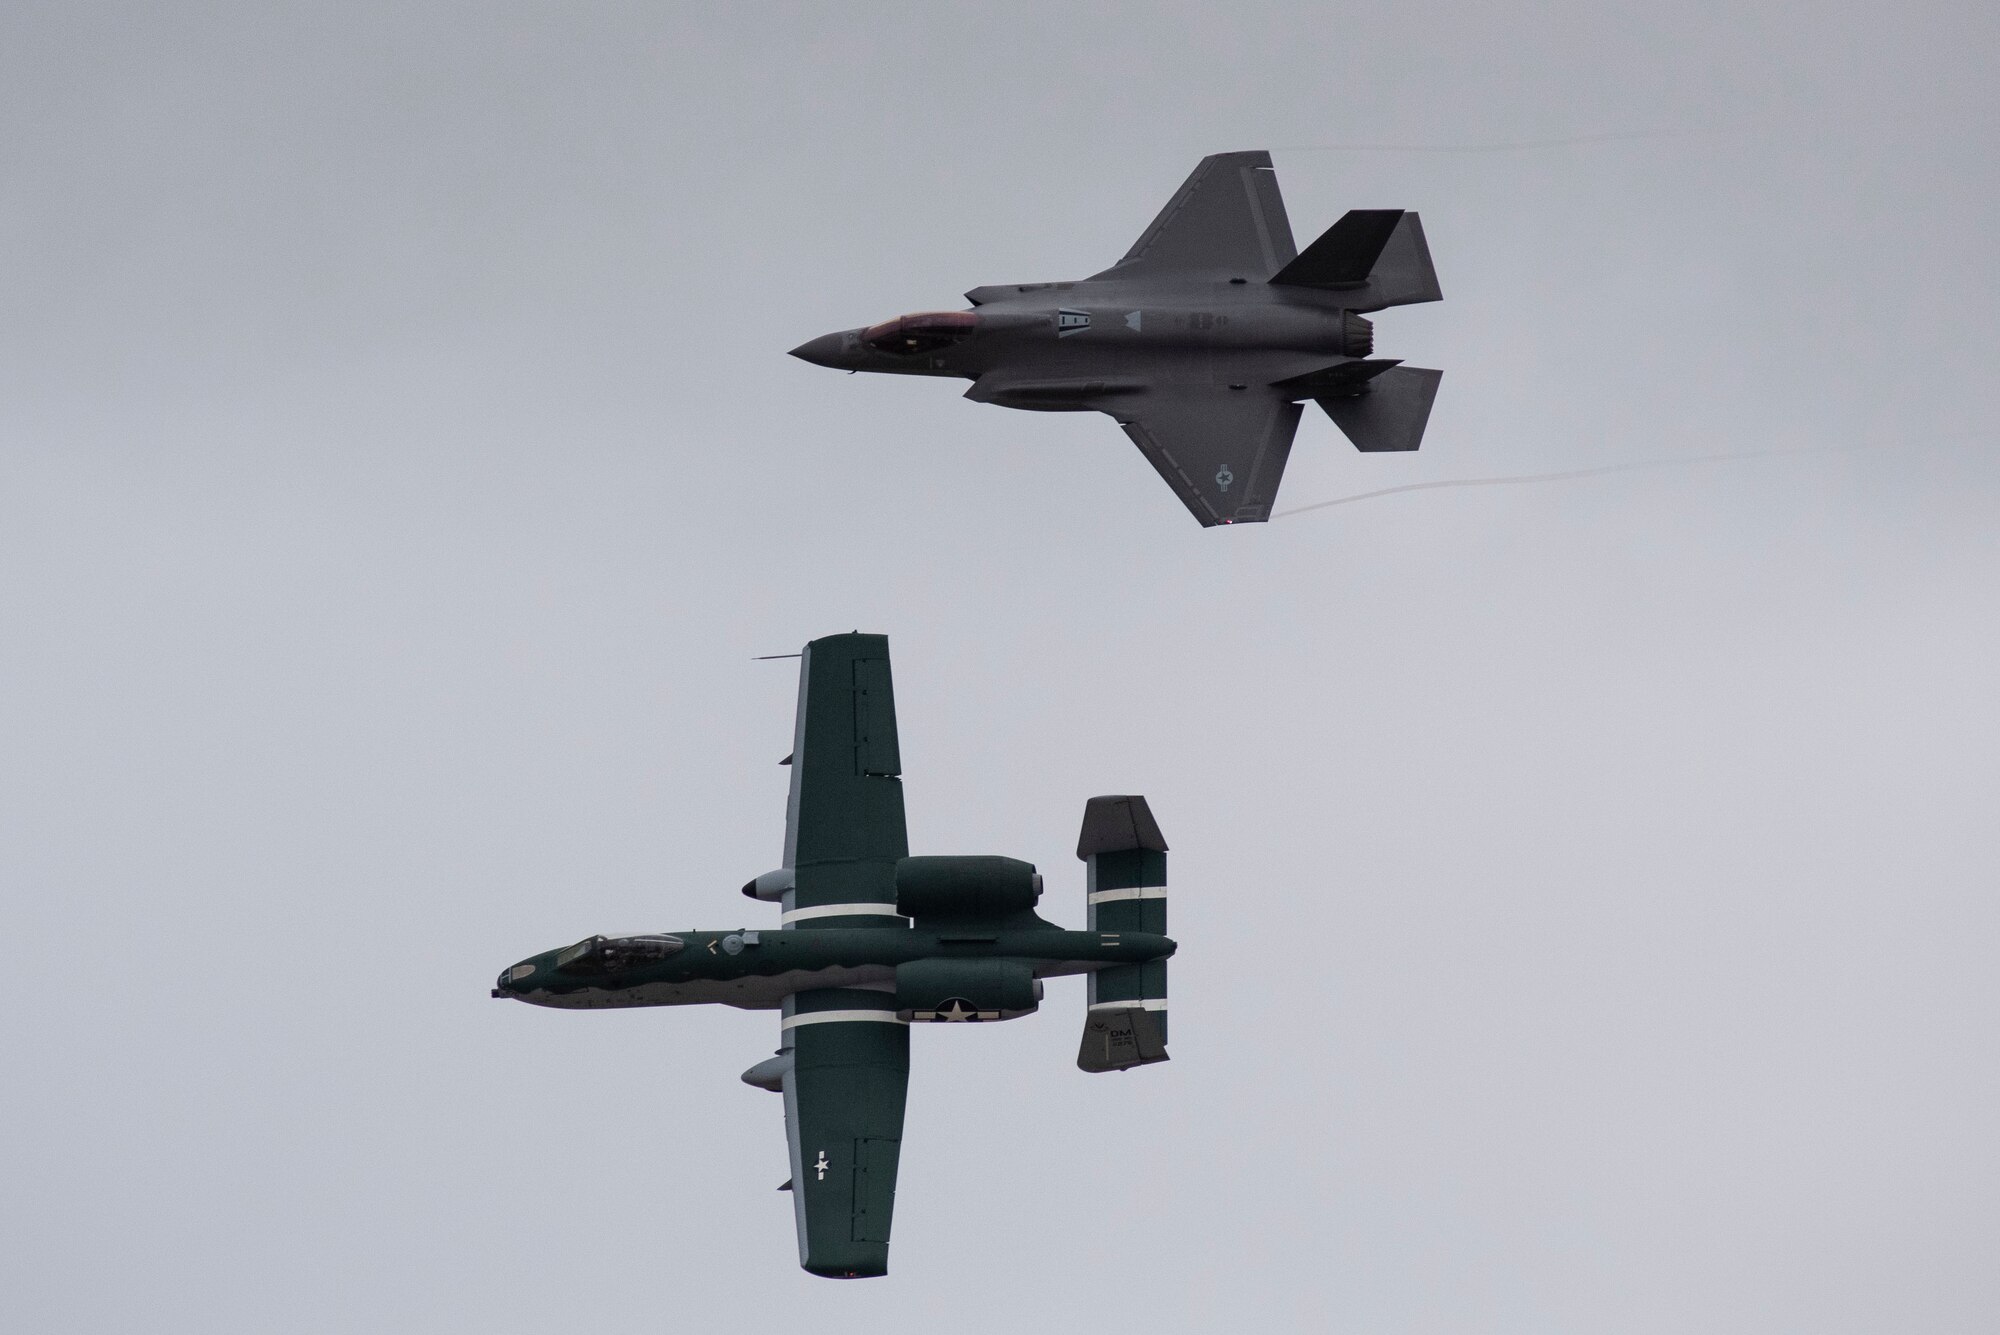 A-10 Thunderbolt II and F-35 Lightning II fly side by side together through the sky over Laughlin Air Force Base, Texas, Oct. 13, 2020. The pilots flew over the base to show the capabilities of the jets to the student pilots. (U.S. Air Force photo by Airman 1st Class David Phaff)